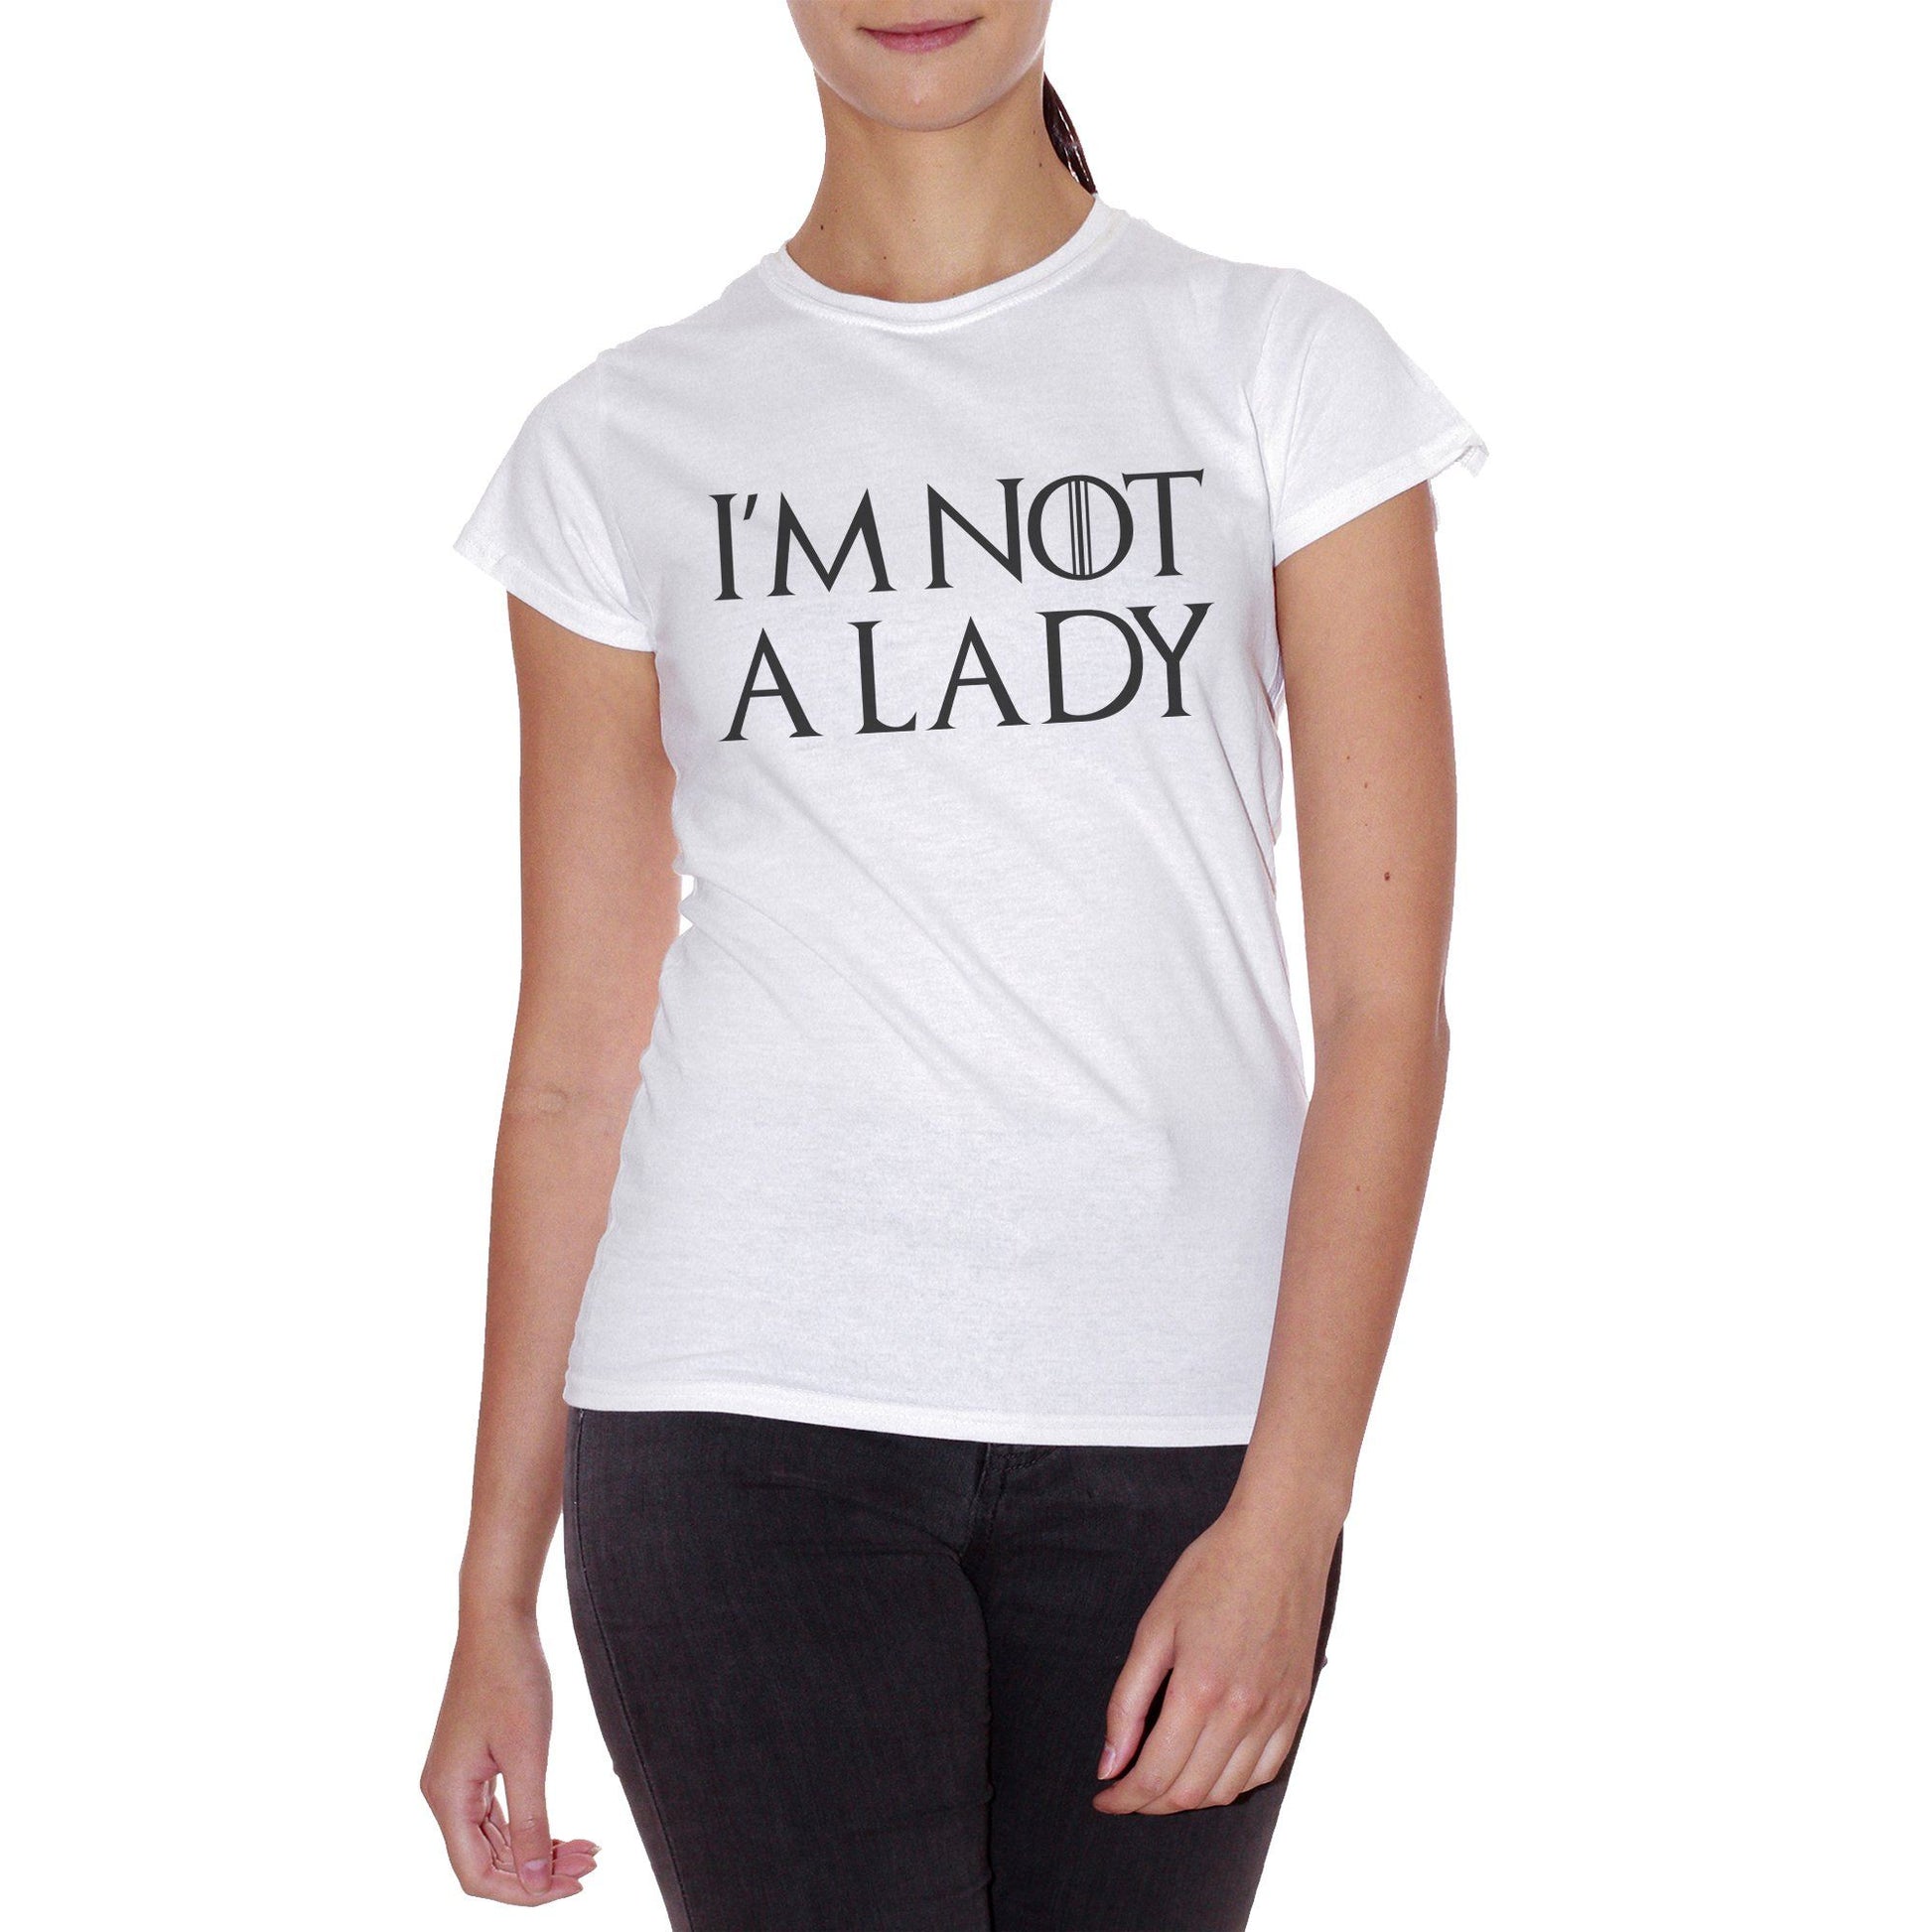 Lavender T-Shirt I'M Not A Lady | Arya Stark Quote | Game Of Thrones Trono Di Spade Serie Tv Ottava Stagione - FILM CucShop